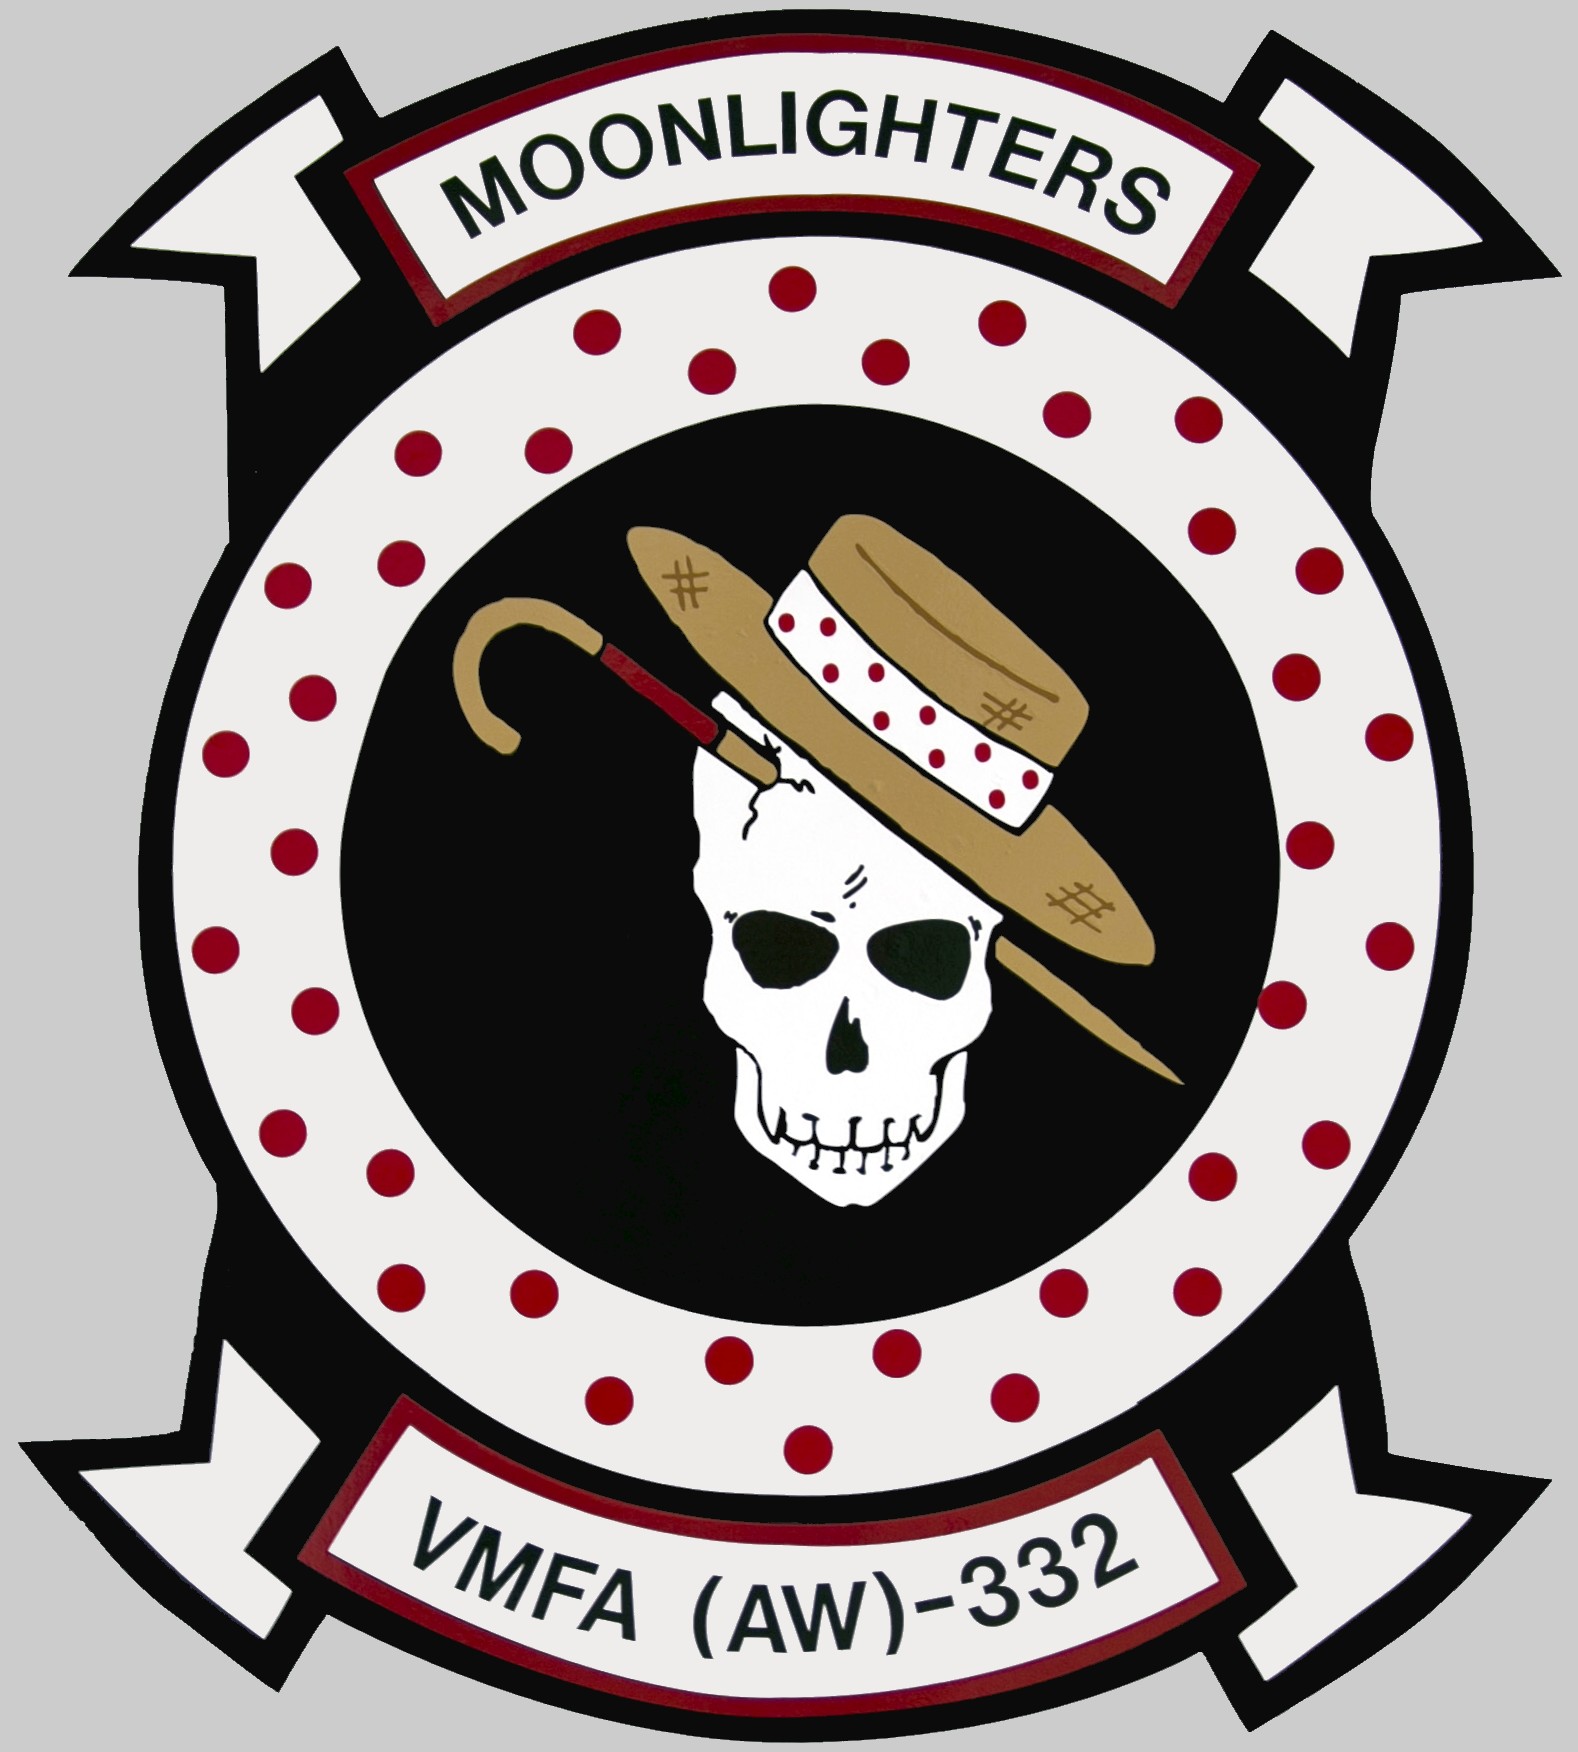 vmfa(aw)-332 moonlighters insignia crest patch badge marine fighter attack squadron all-weather usmc 02c